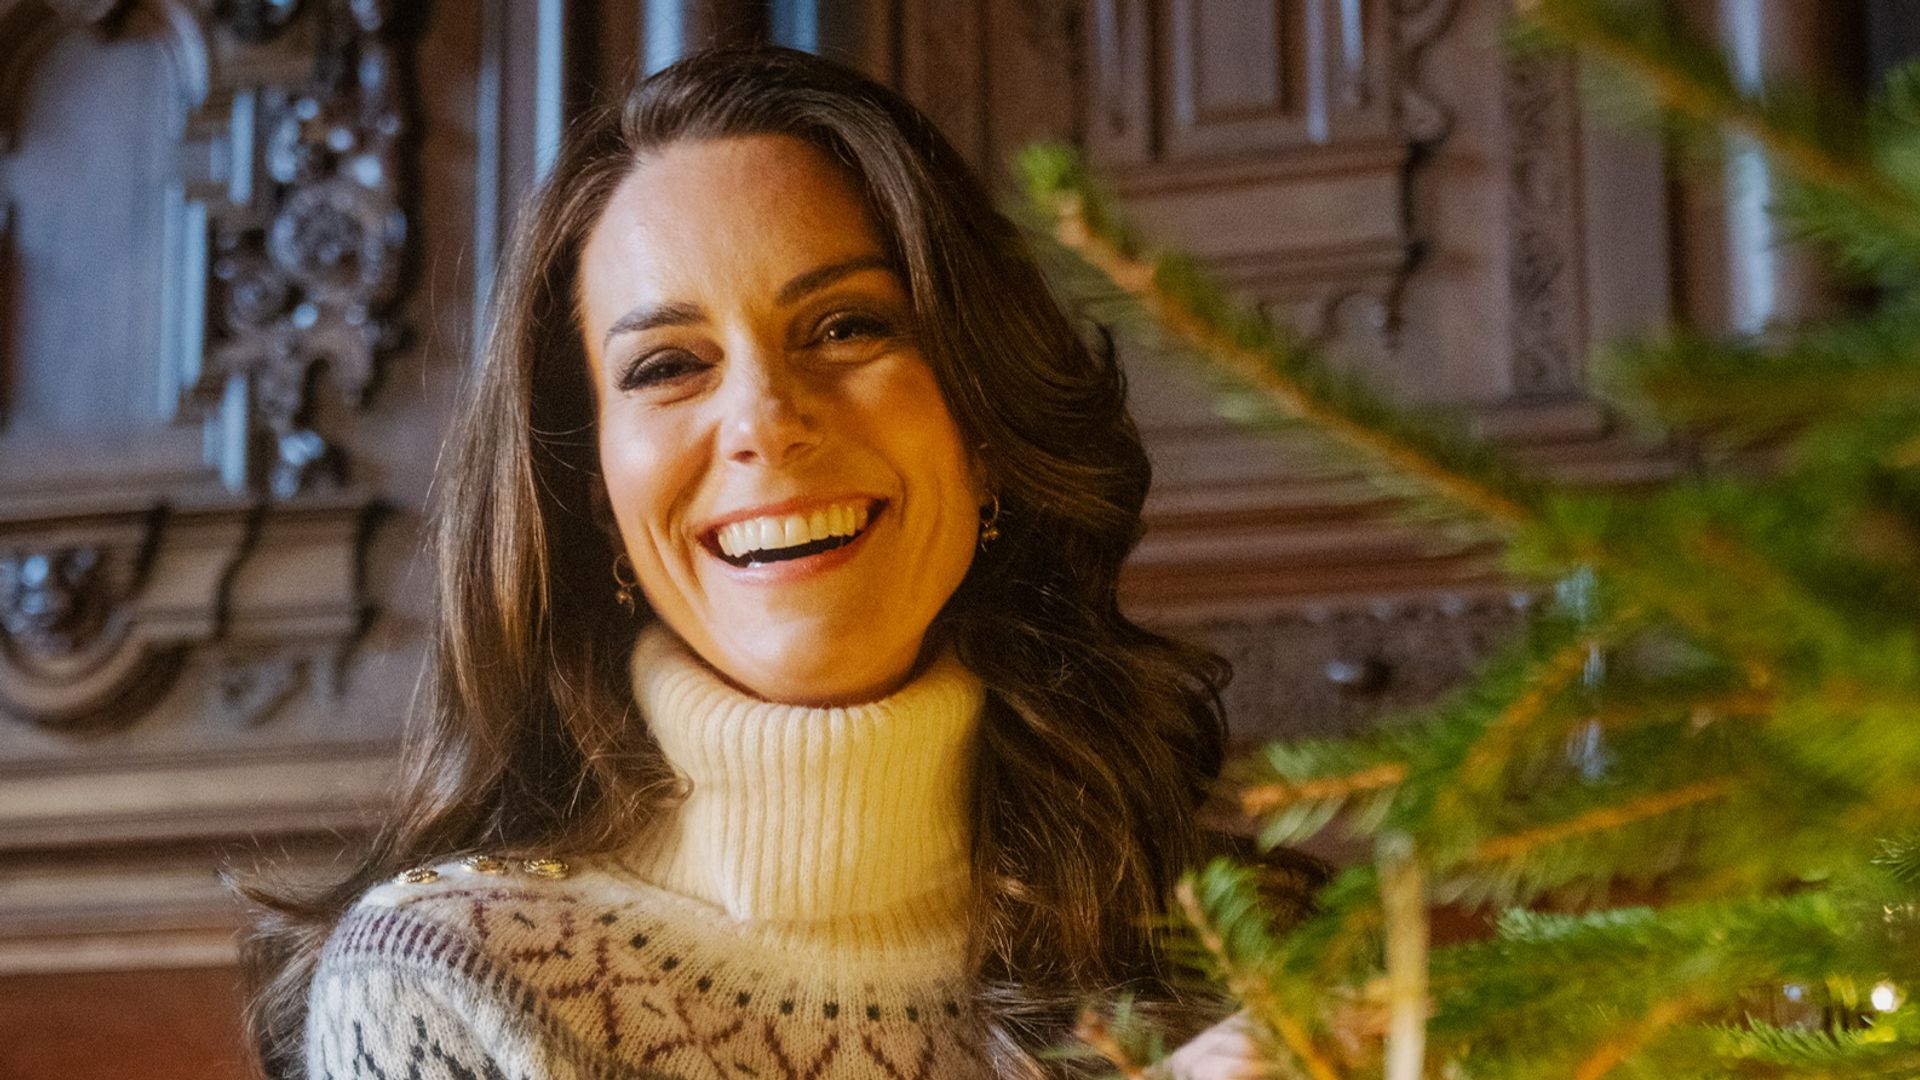 Kate Middleton in a cream jumper decorating a Christmas tree